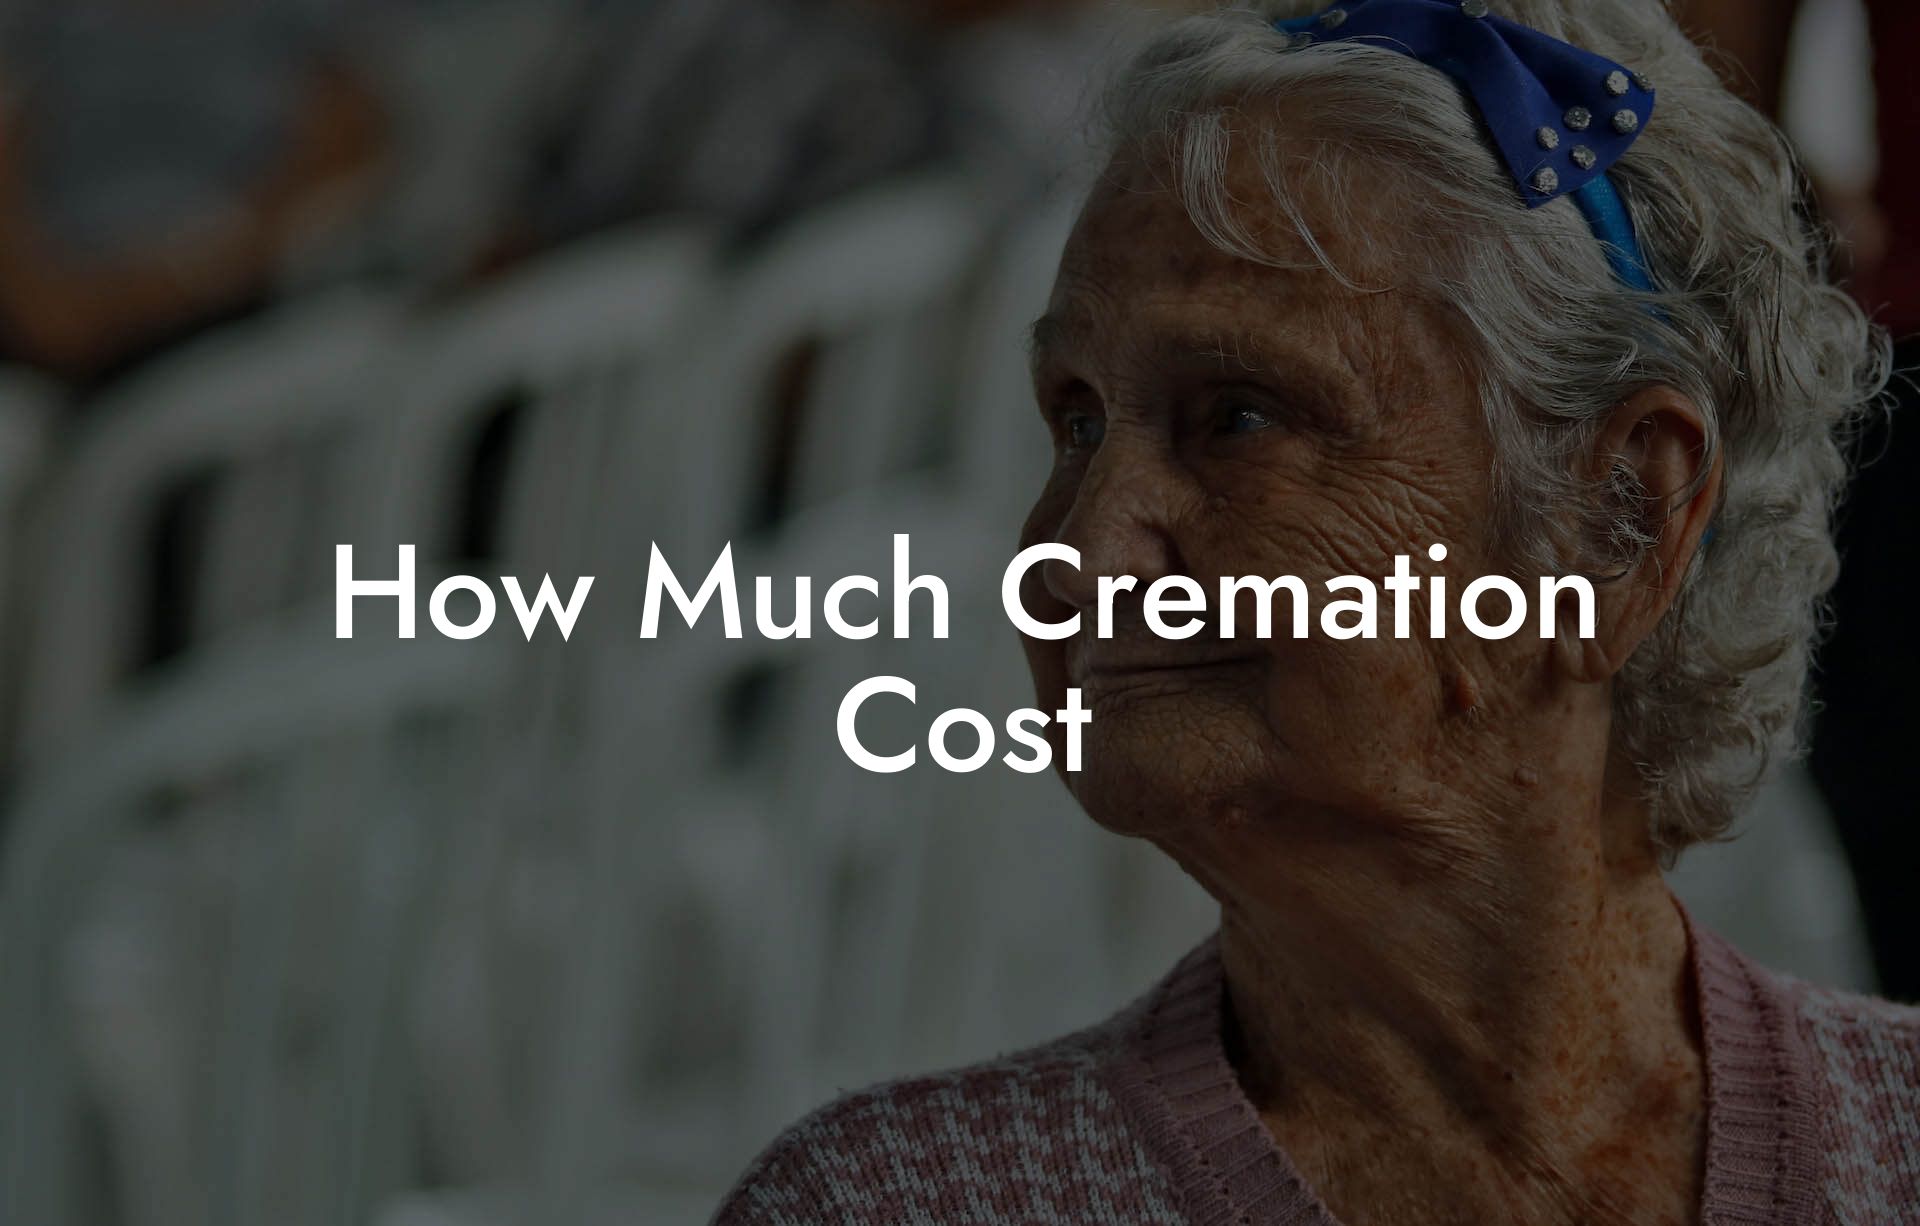 How Much Cremation Cost